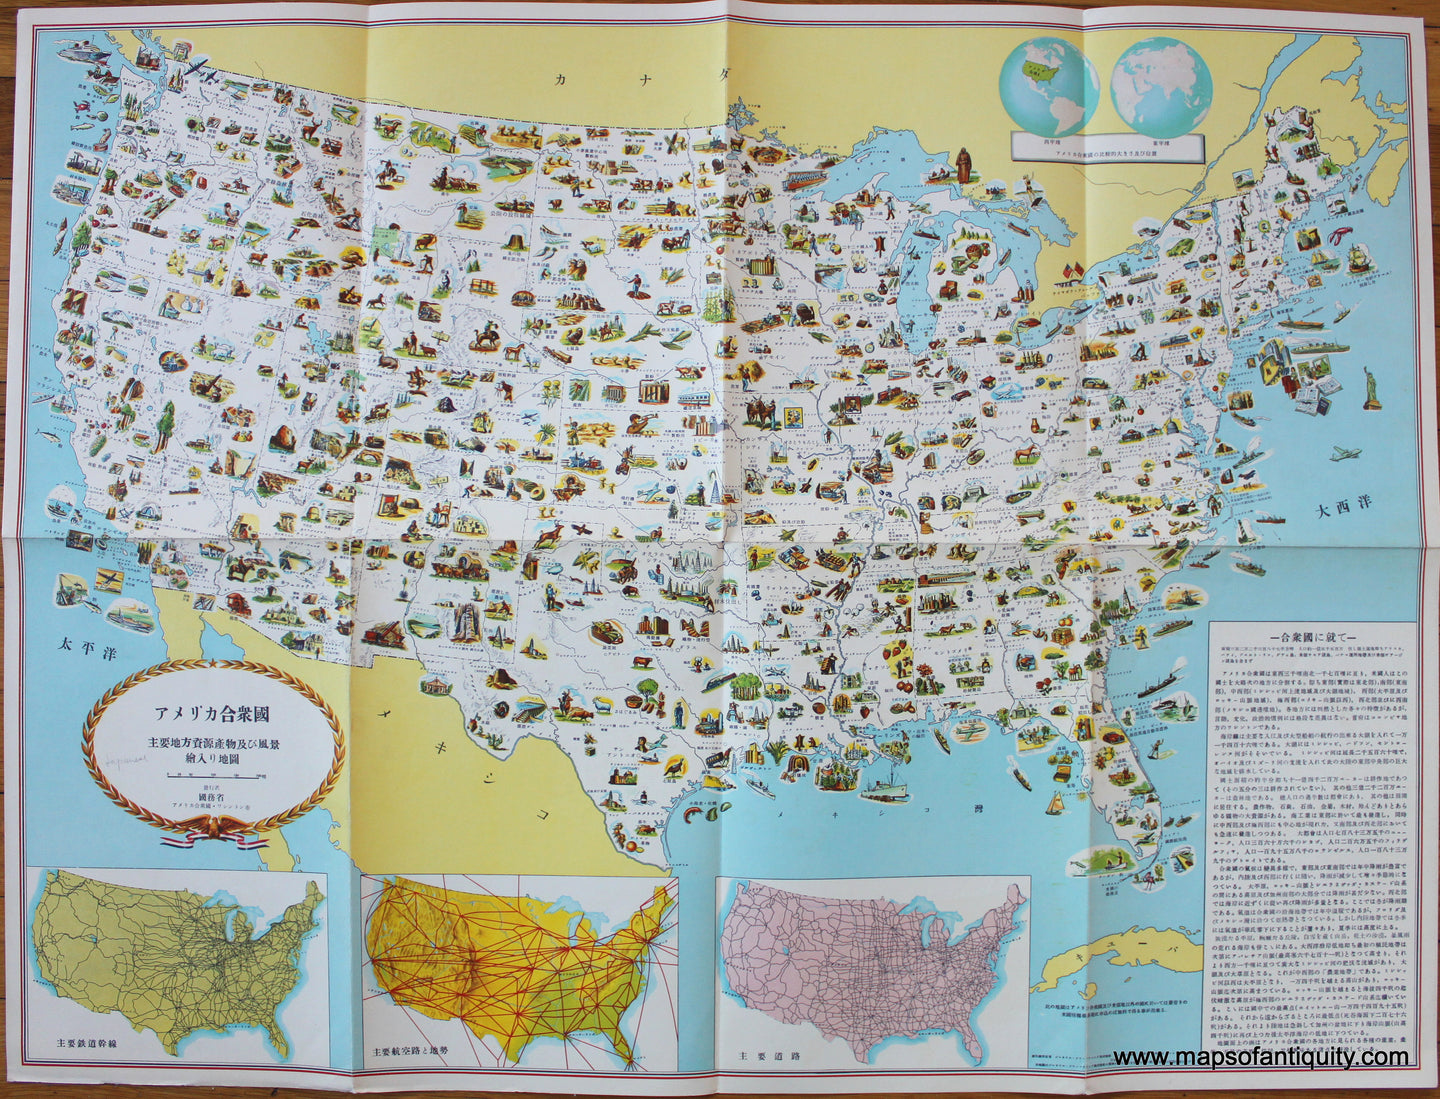 Antique-Map-United-States-America-Pictorial-Resources-Products-Natural-Features-US-USA-Department-of-State-1954-1950s-midcentury-20th-century-maps-of-antiquity